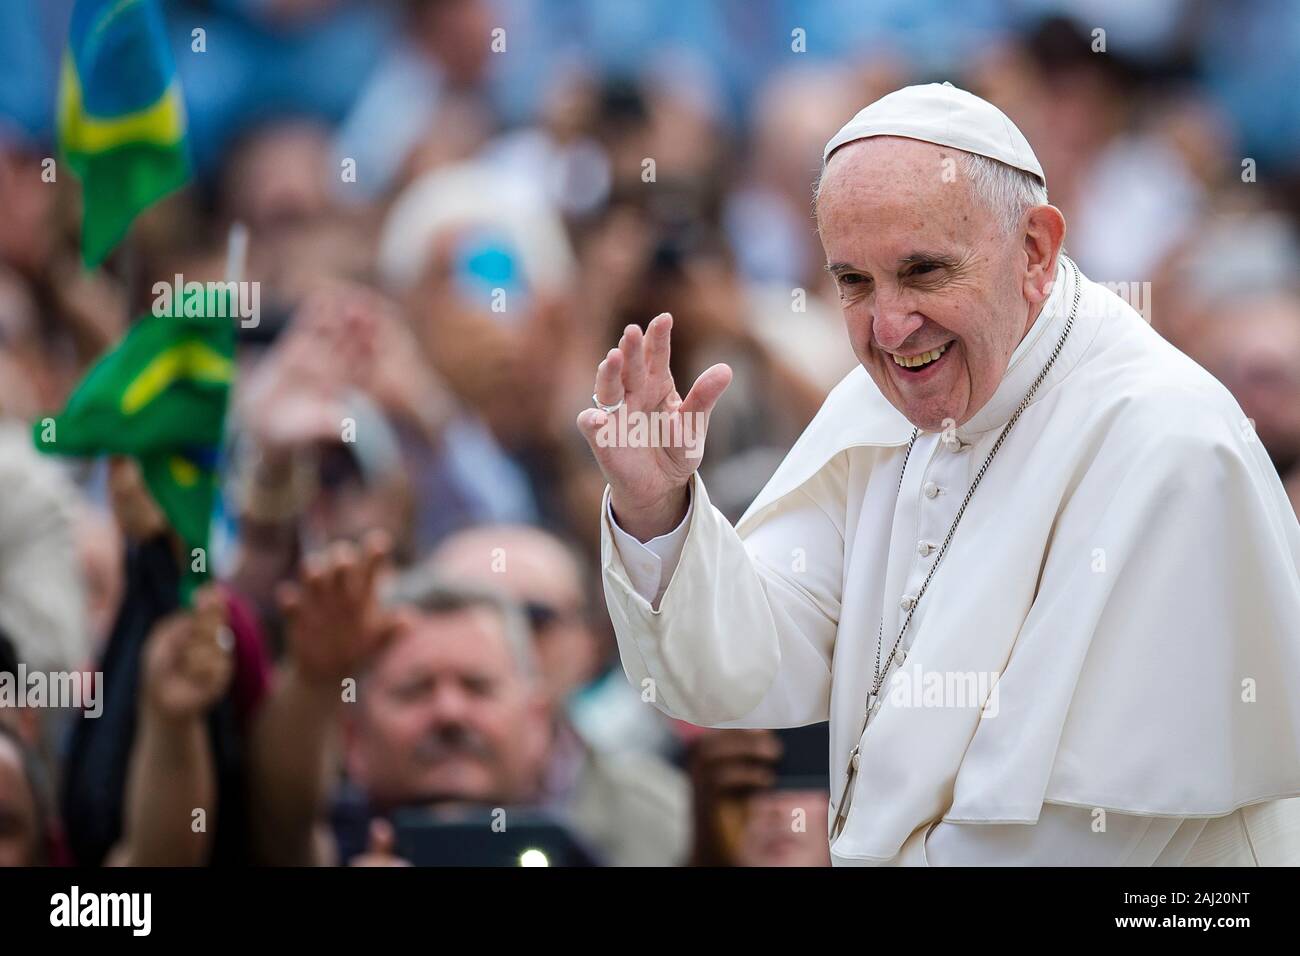 Pope Francis arrives for his weekly general audience in St. Peter's Square at the Vatican, Rome, Lazio, Italy, Europe Stock Photo